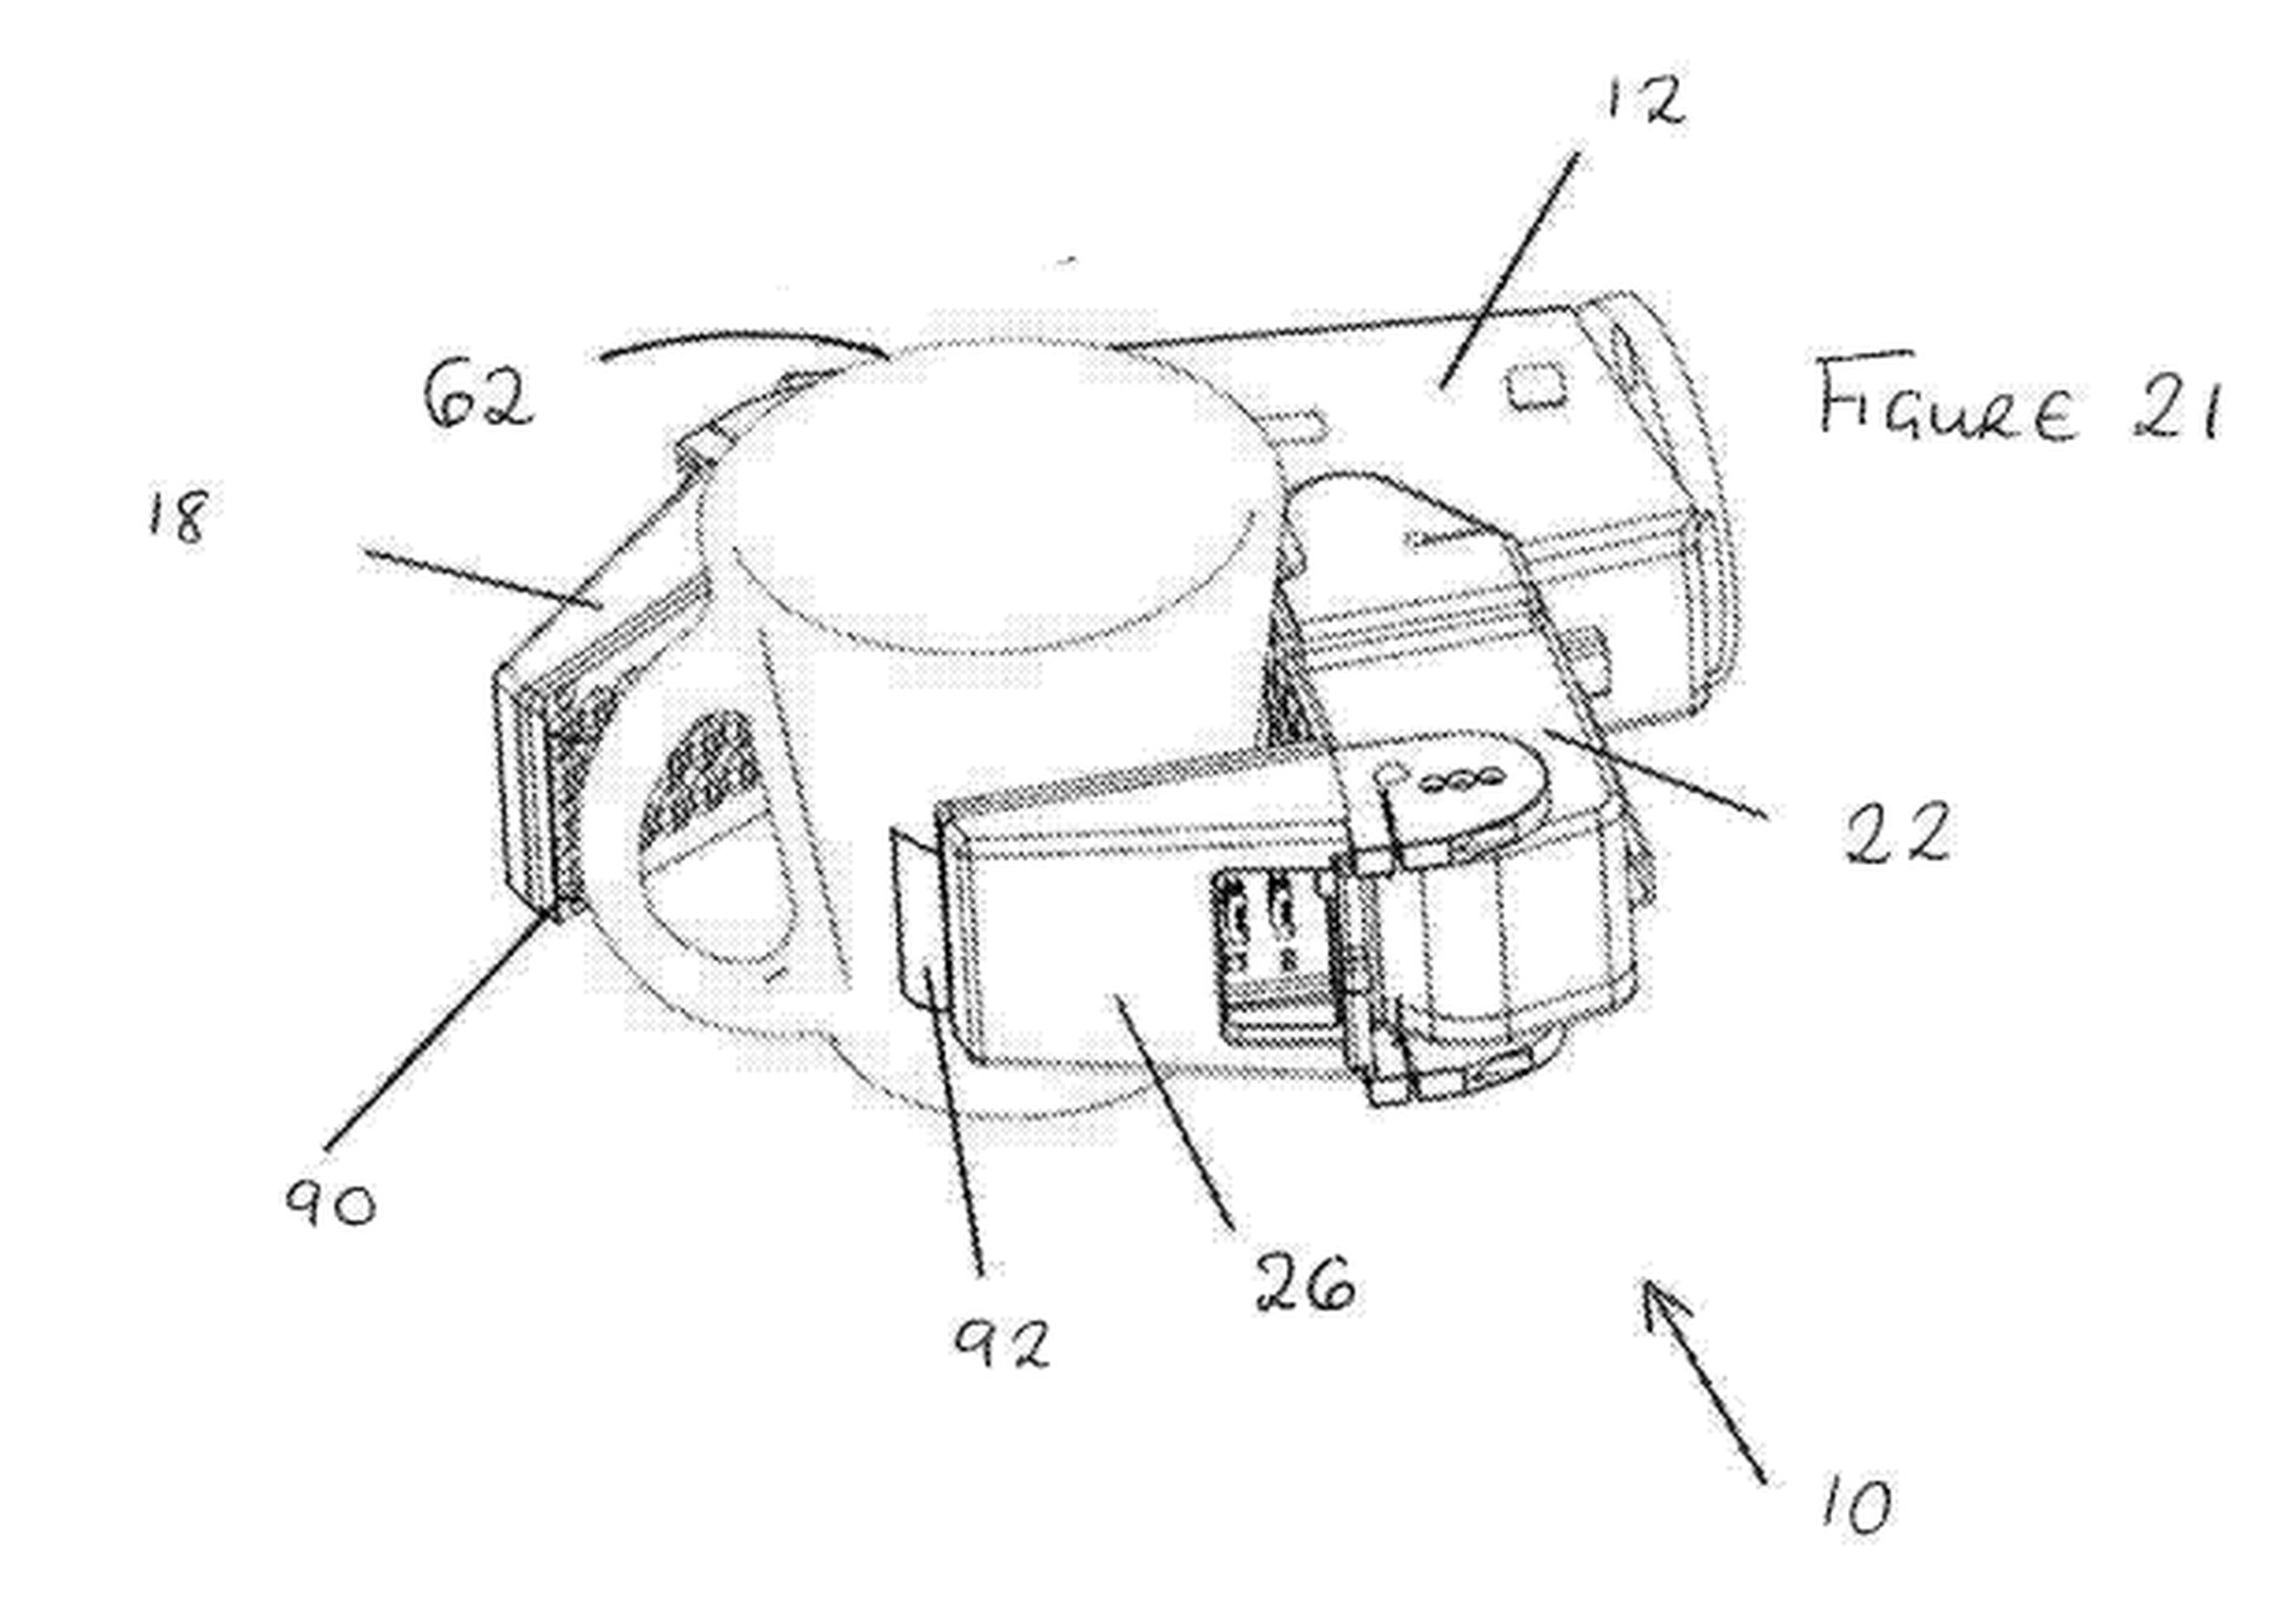 A drawing from a Dyson patent filing shows a robot hand holding a cup